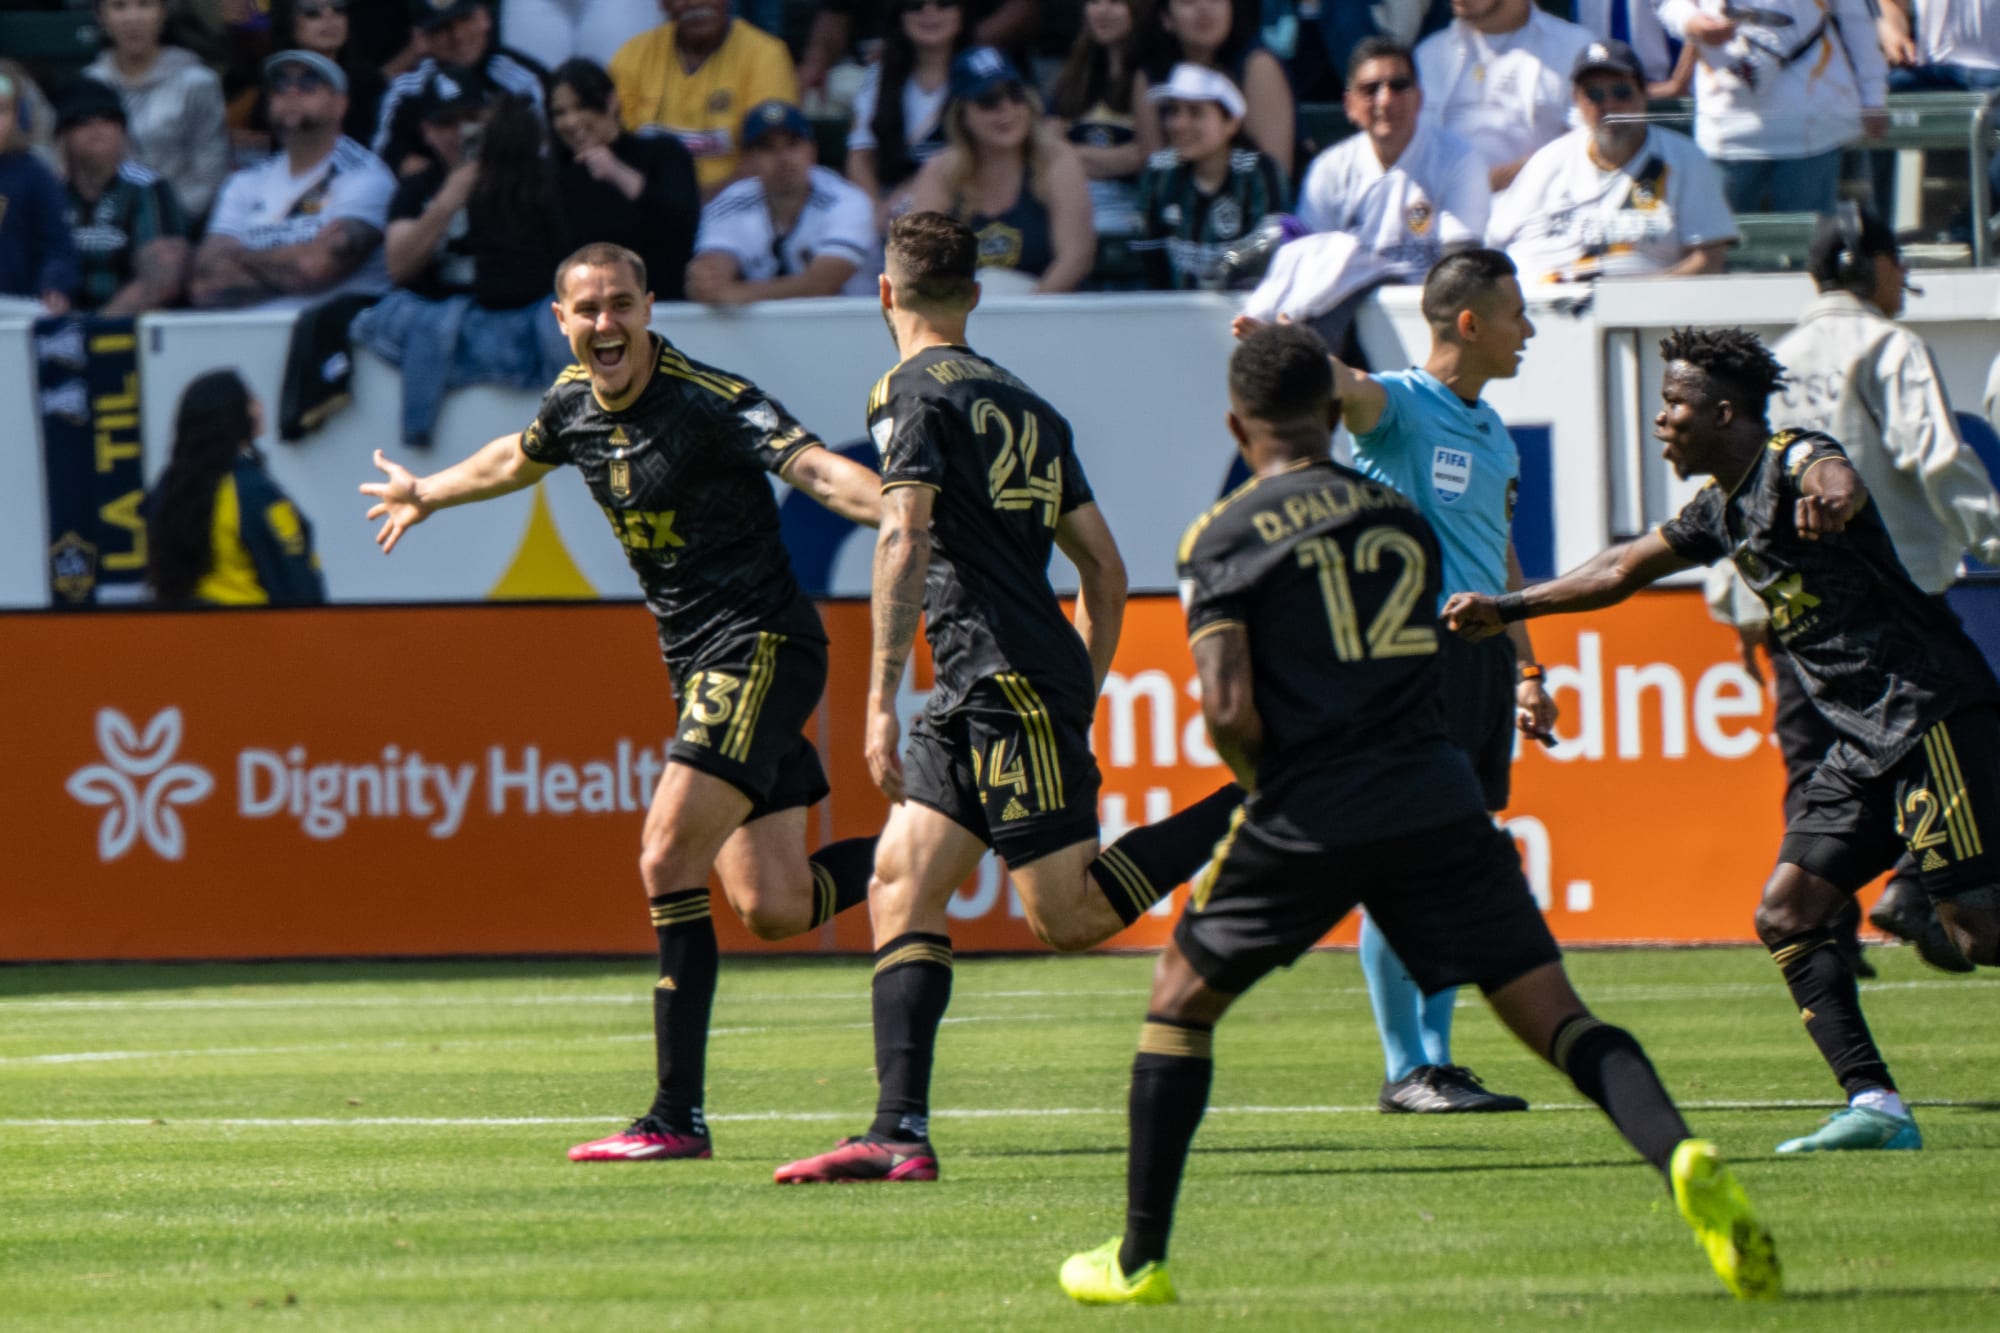 Photo of MLS news: LAFC victory in El Trafico, O’Brien scores first goal, Vieira new job?